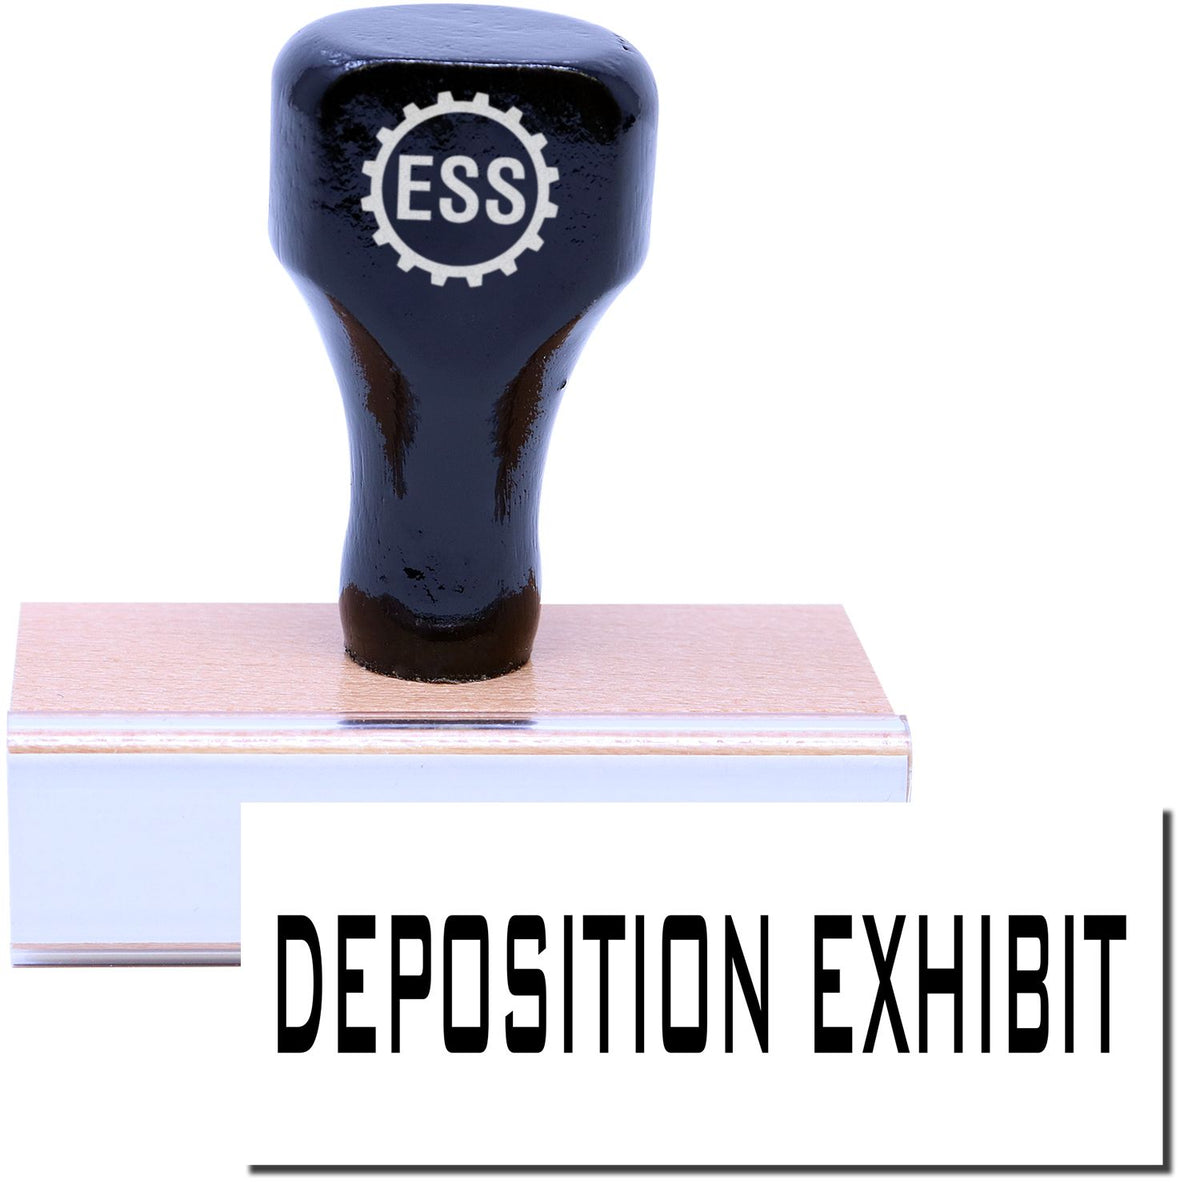 A stock office rubber stamp with a stamped image showing how the text &quot;DEPOSITION EXHIBIT&quot; is displayed after stamping.